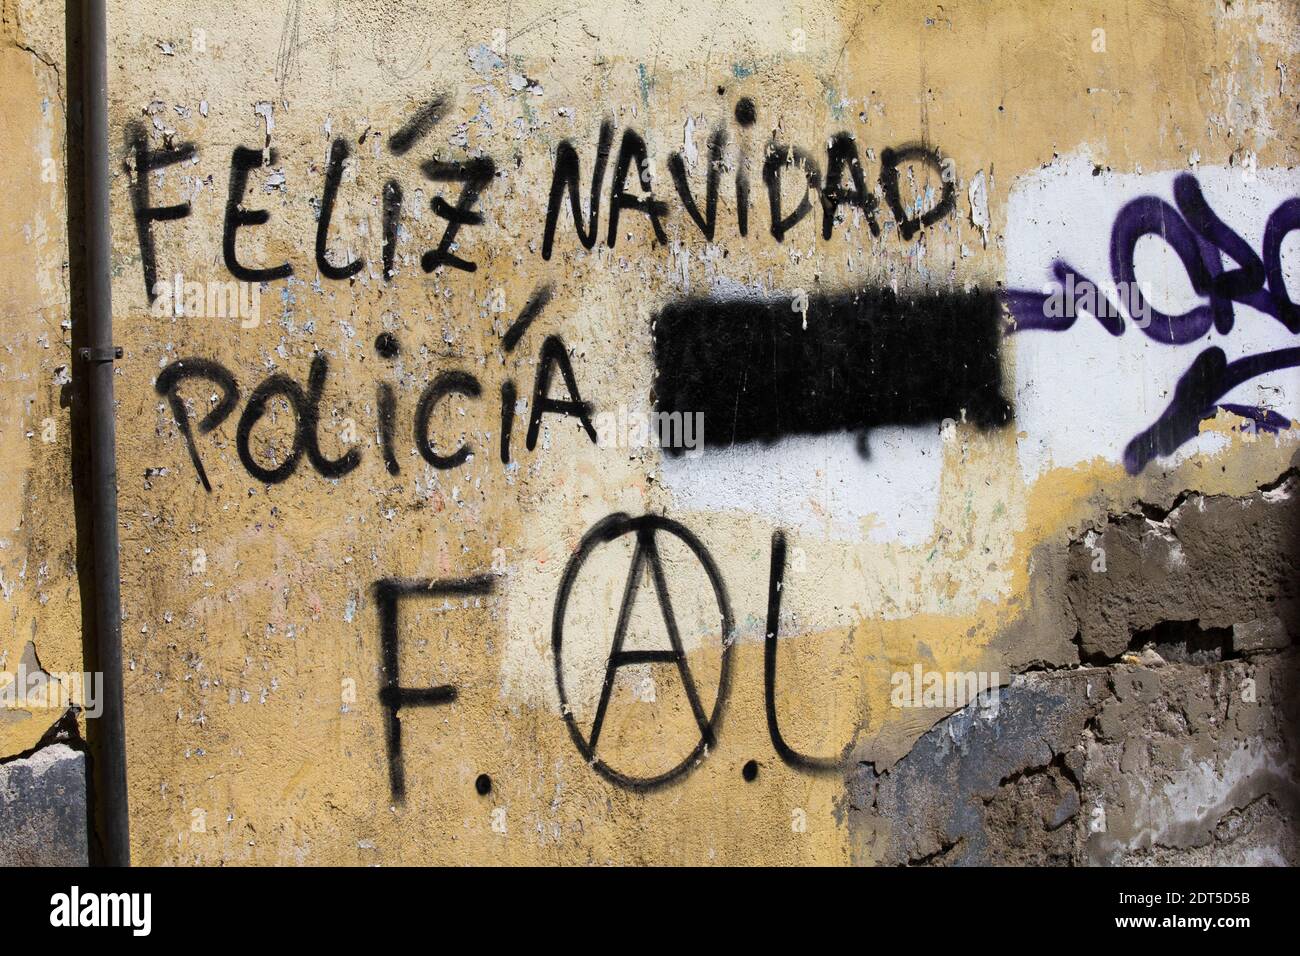 Merry Christmas police graffiti with an abusive term painted out.  Portuguese. Stock Photo